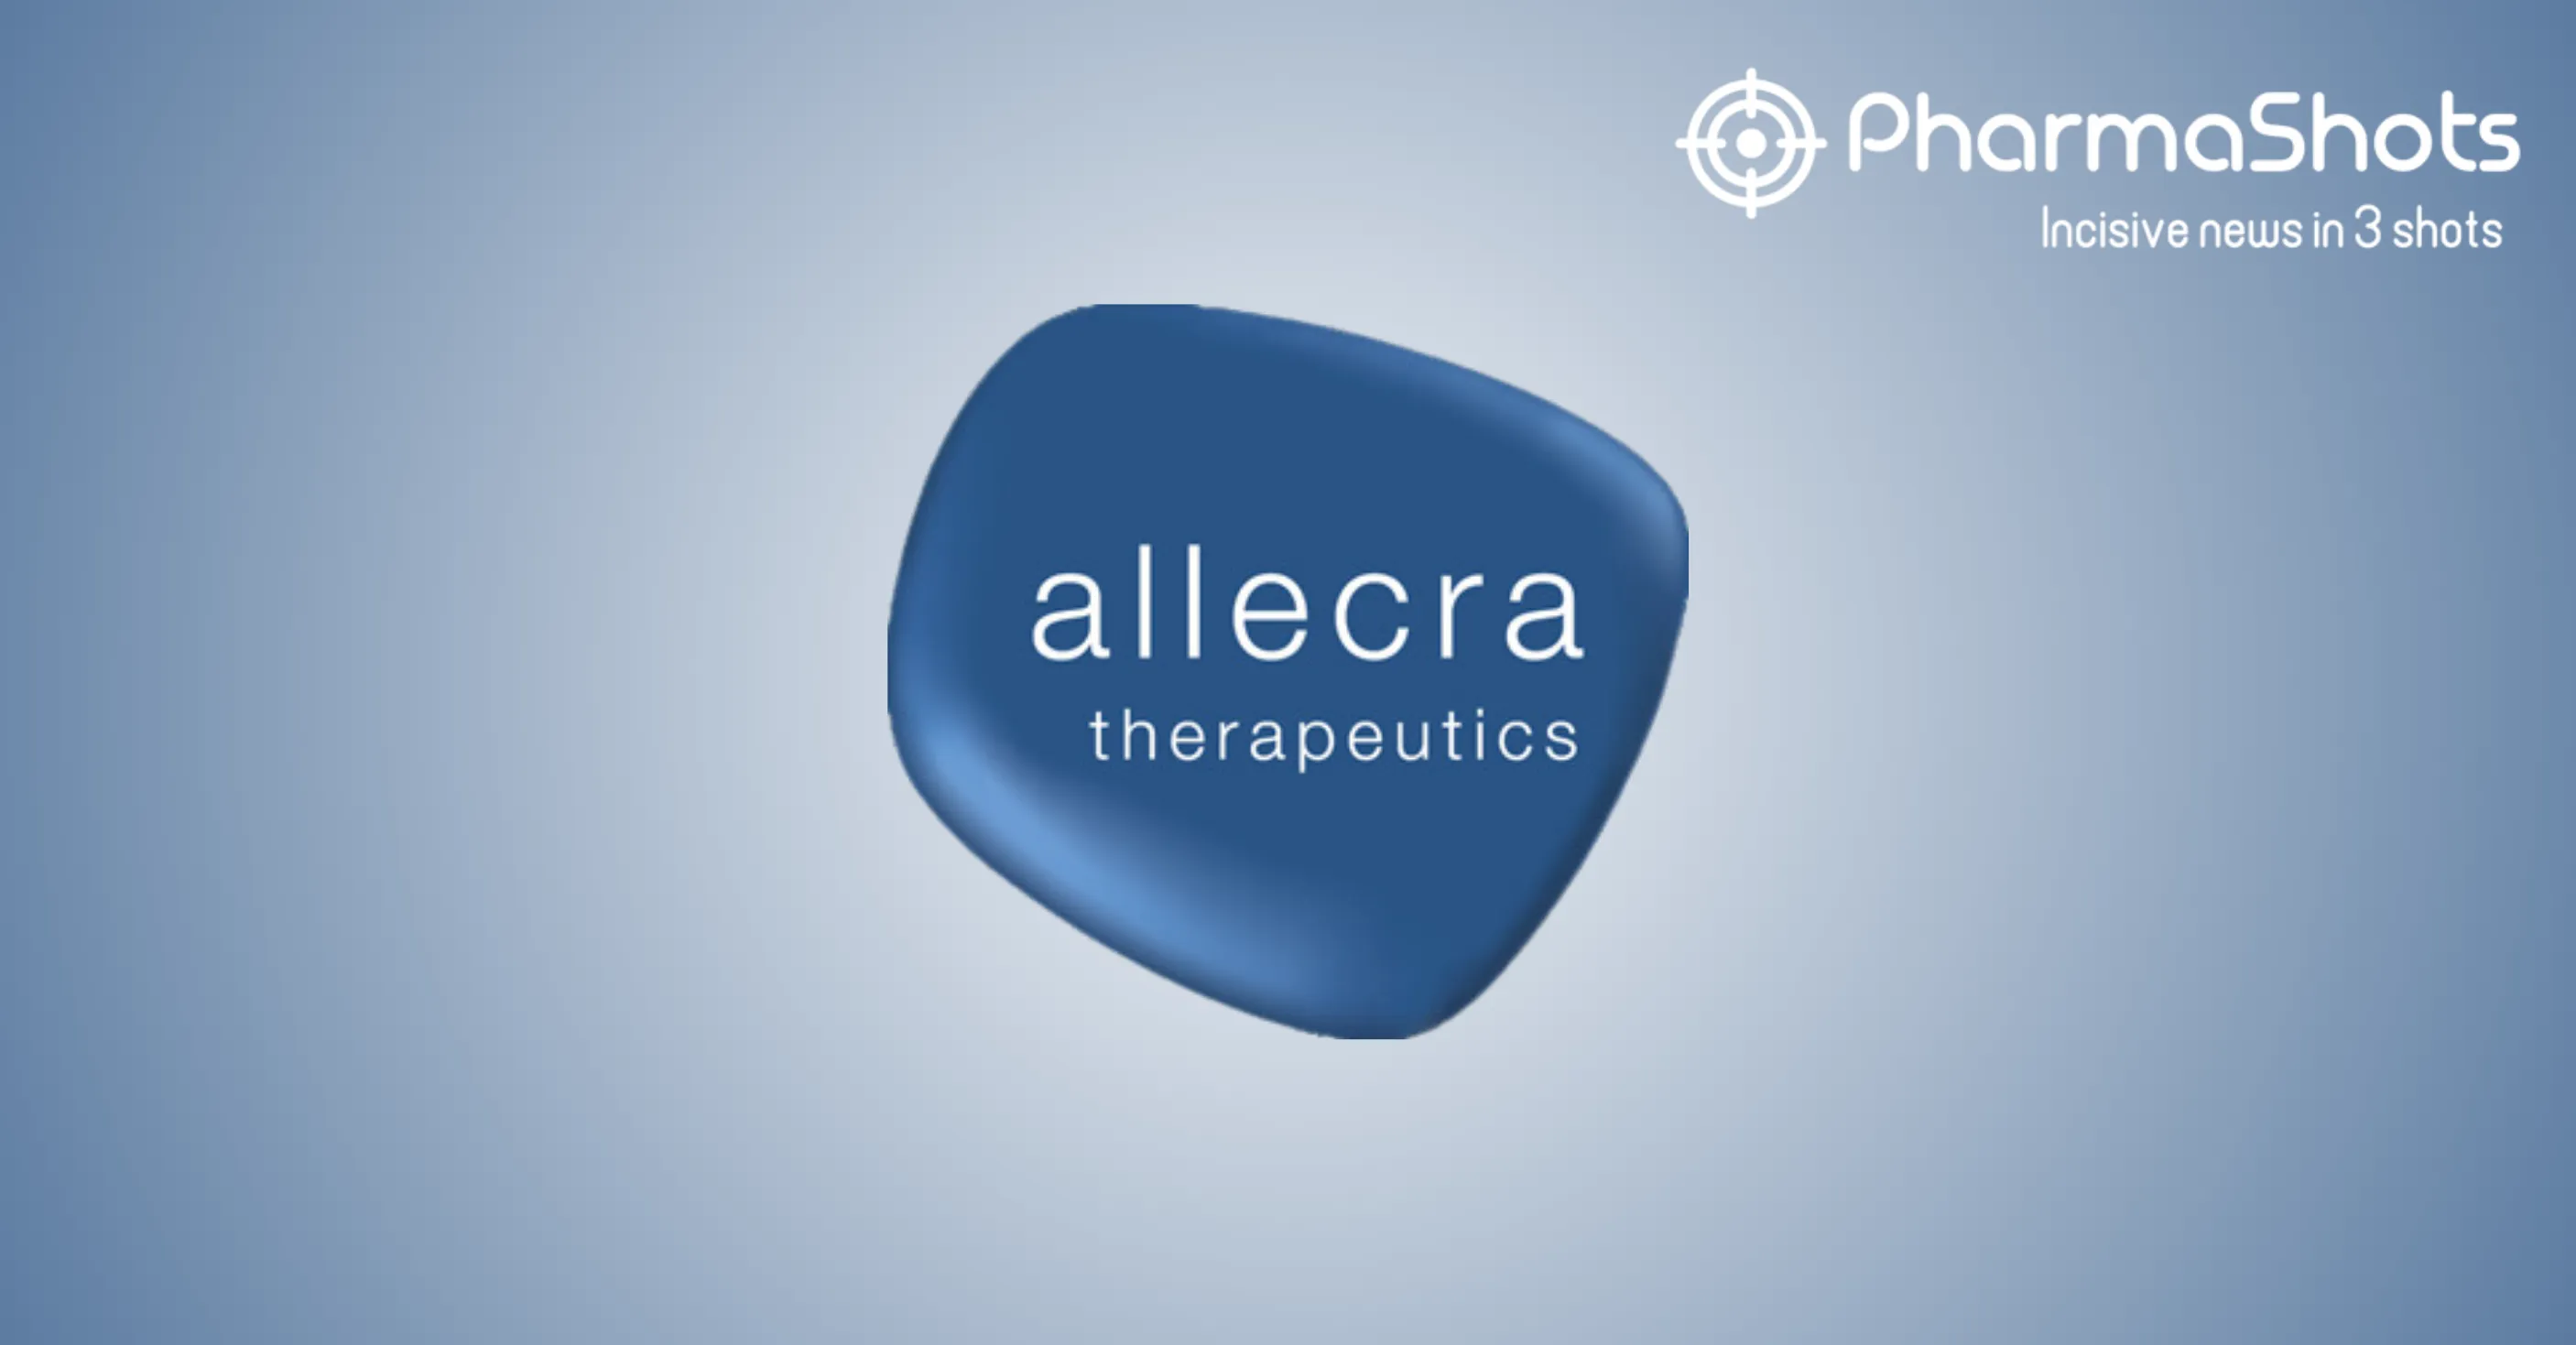 The US FDA Approves Allecra Therapeutics' Exblifep for the Treatment of Complicated Urinary Tract Infections (cUTIs)